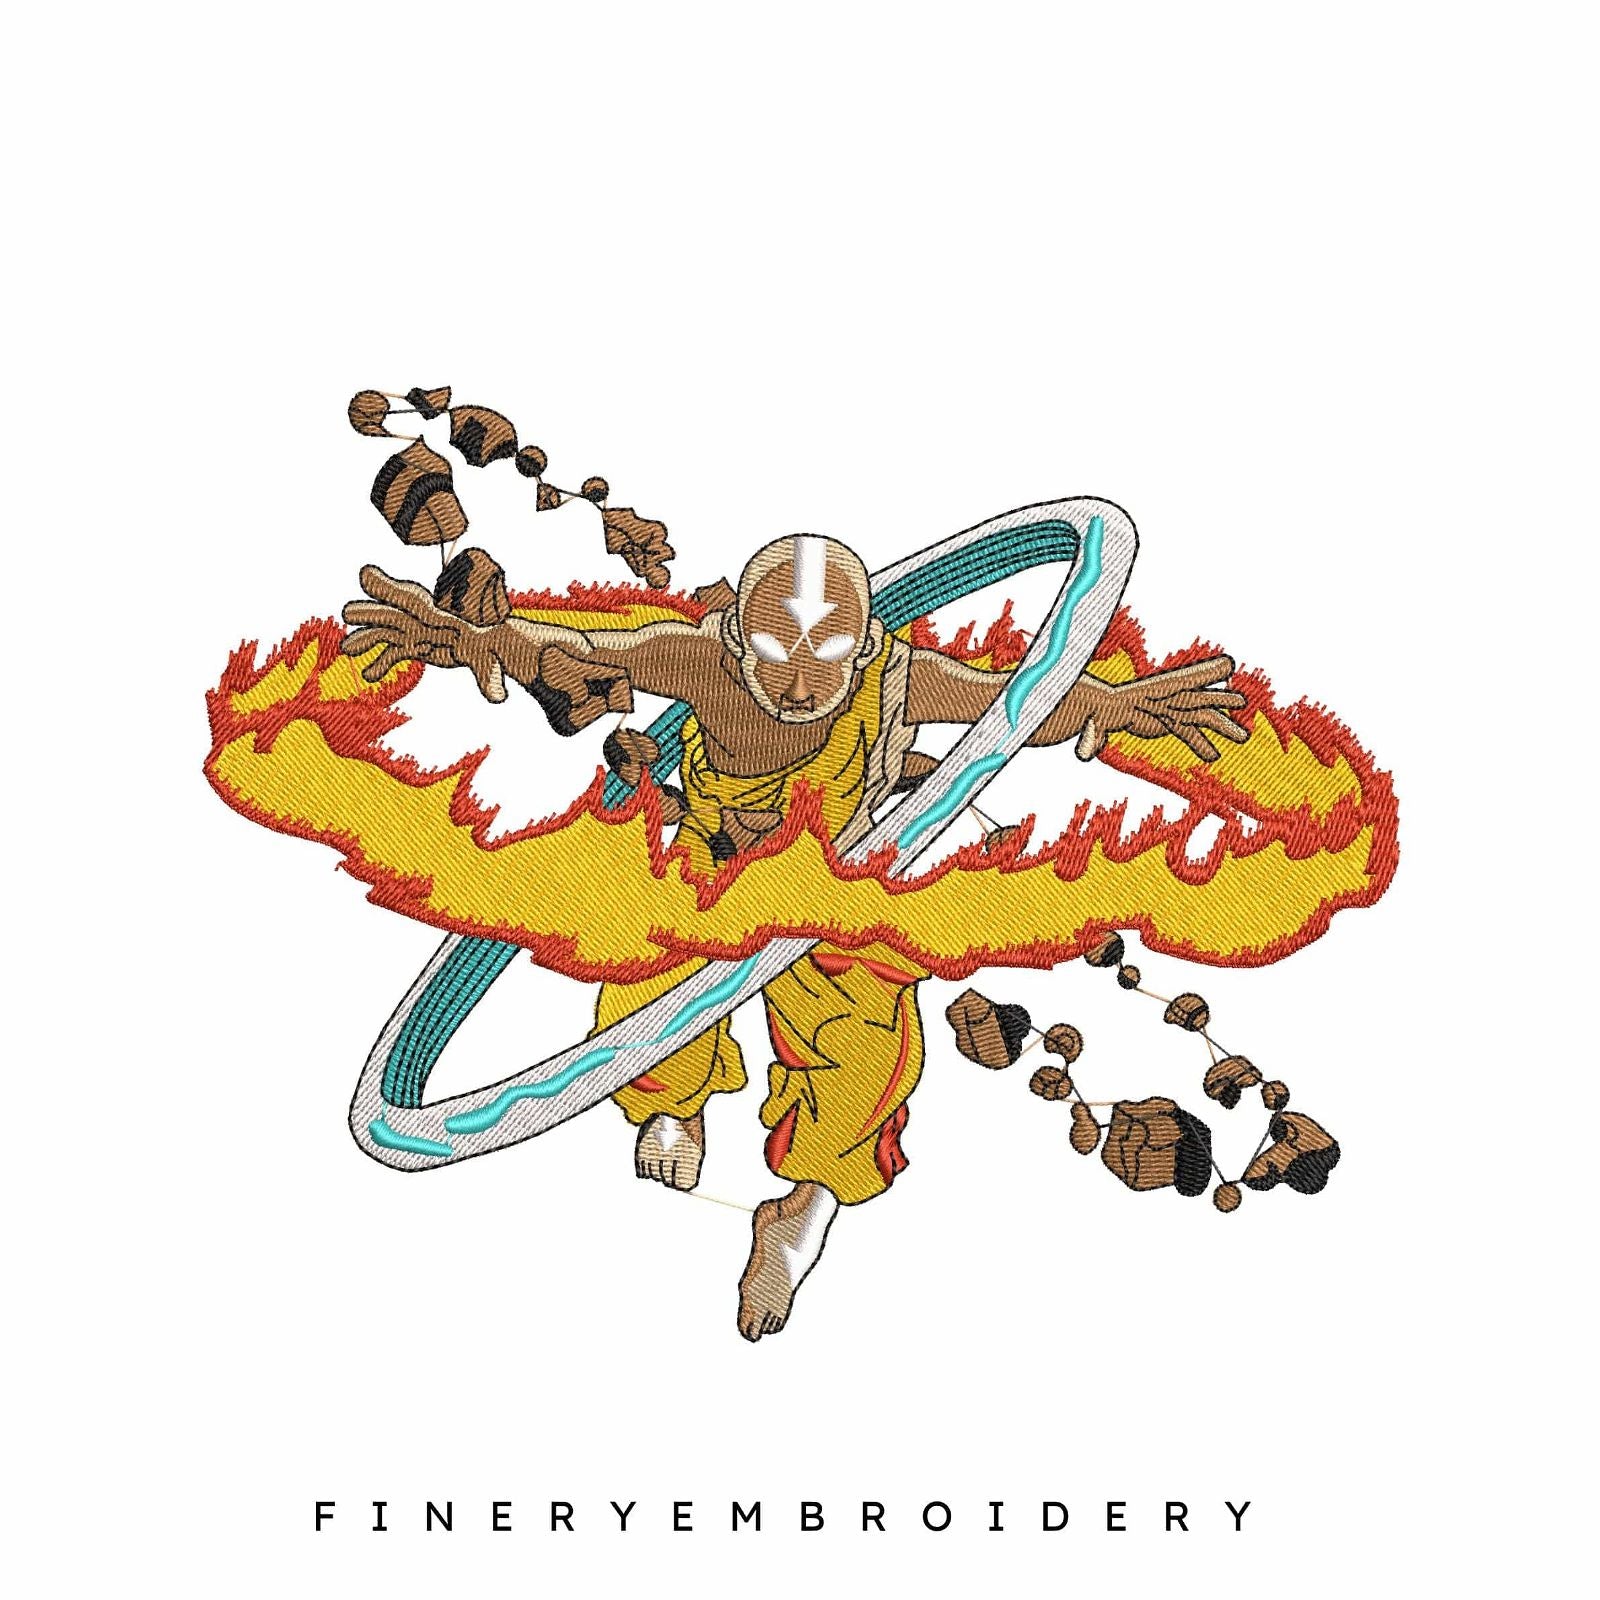 Avatar Aang - Anime - Embroidery Design - FineryEmbroidery